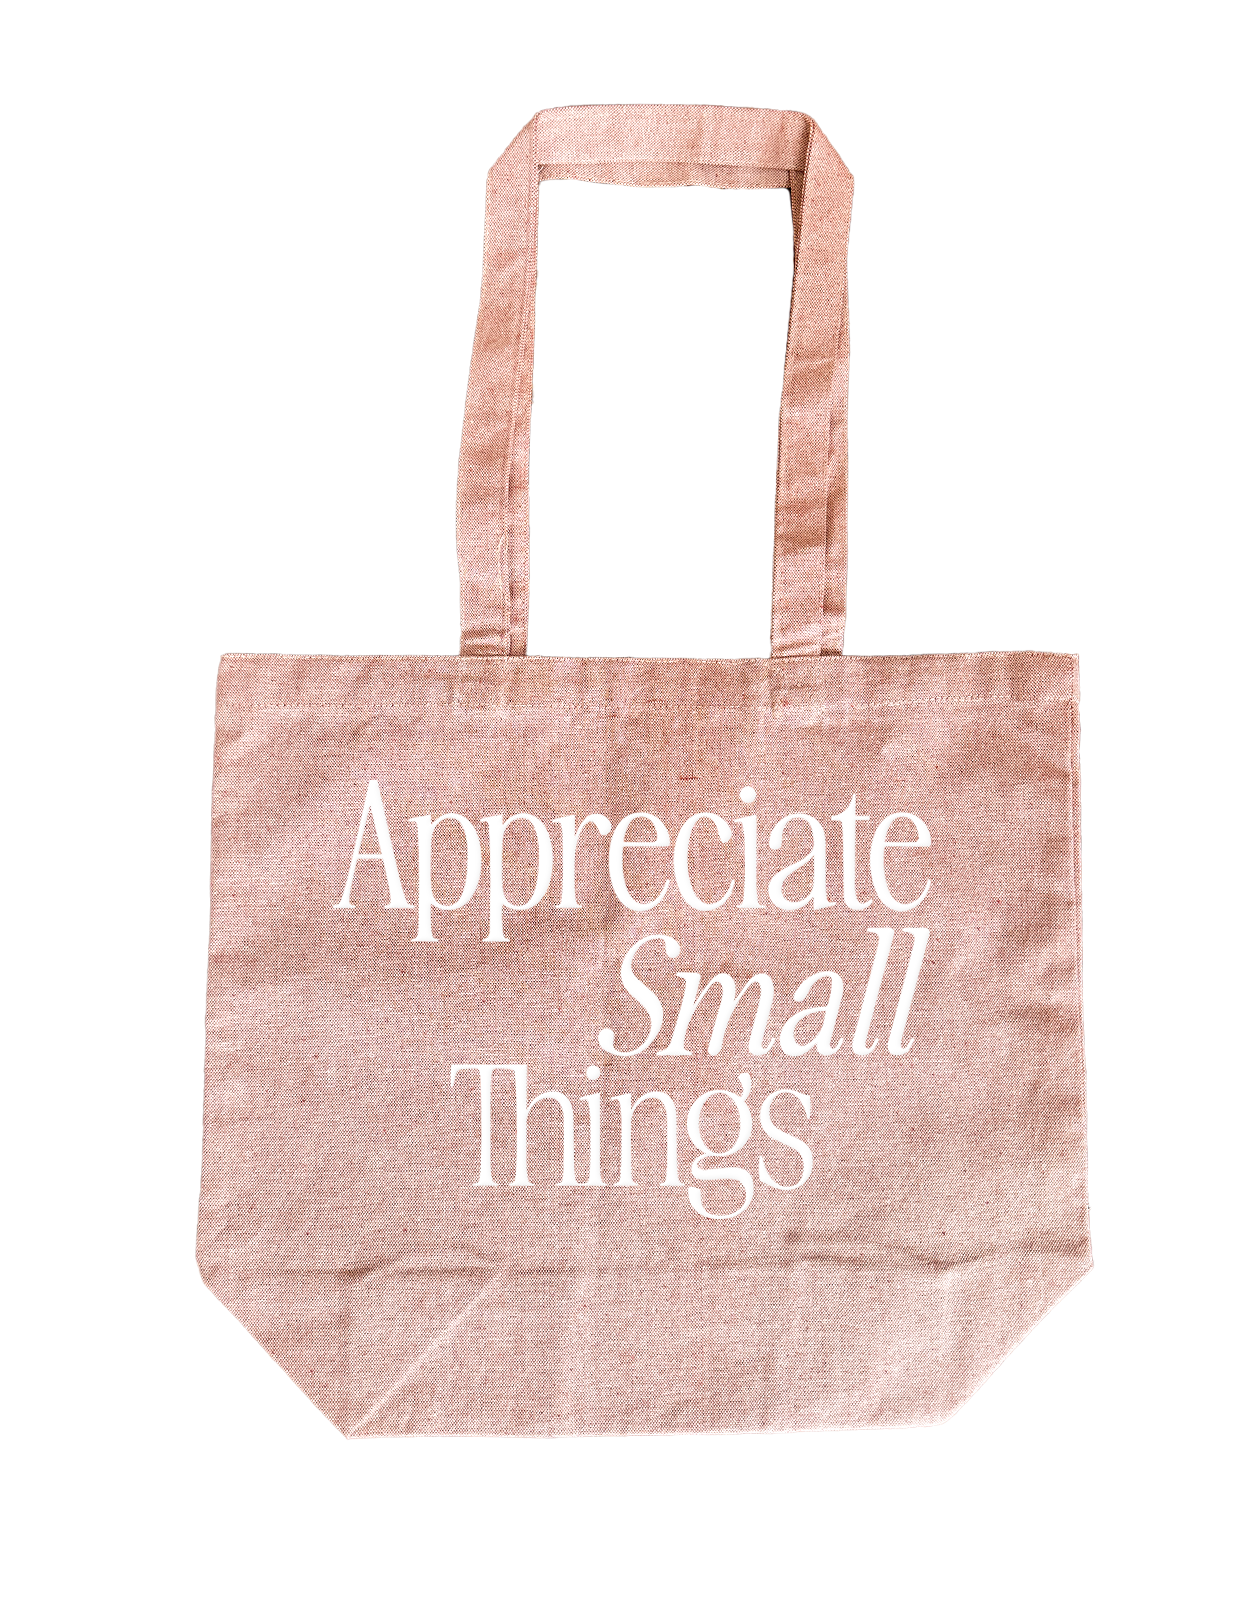 Small-Things-Tote.png